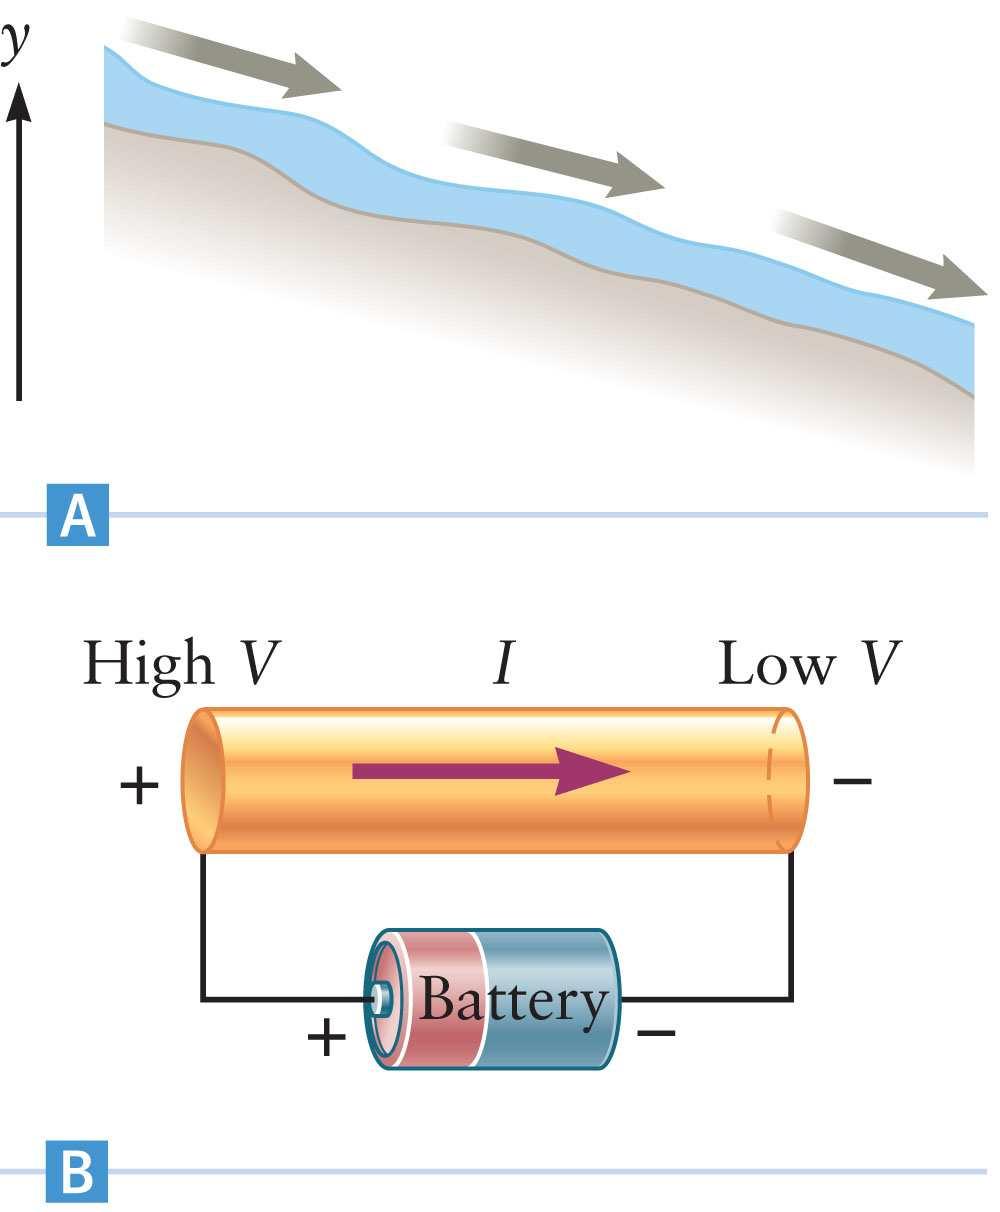 Power Current and Potential Energy For charge to move along a wire, the electric potential energy at one end of the wire must be higher than the electric potential energy at the other end.